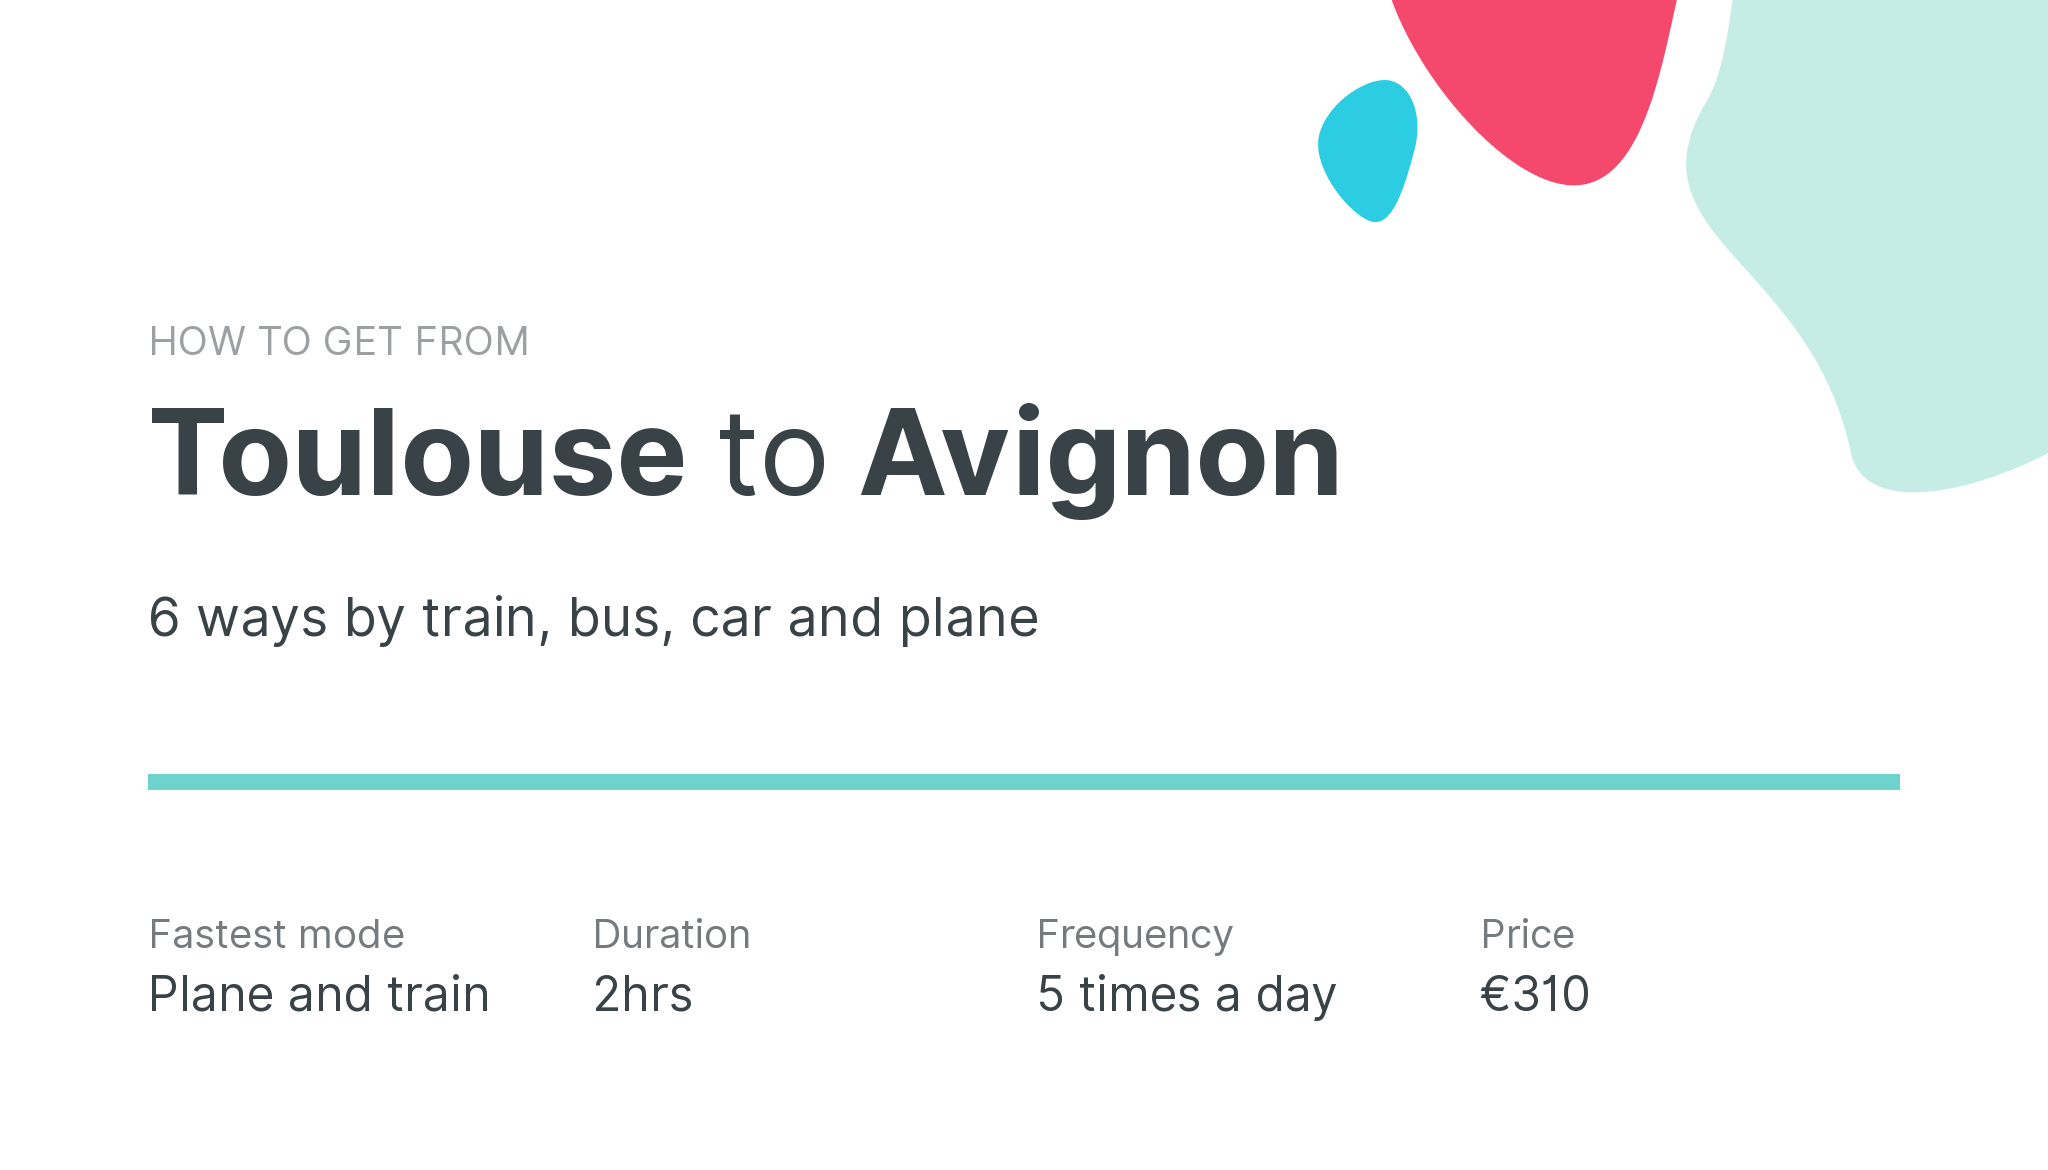 How do I get from Toulouse to Avignon